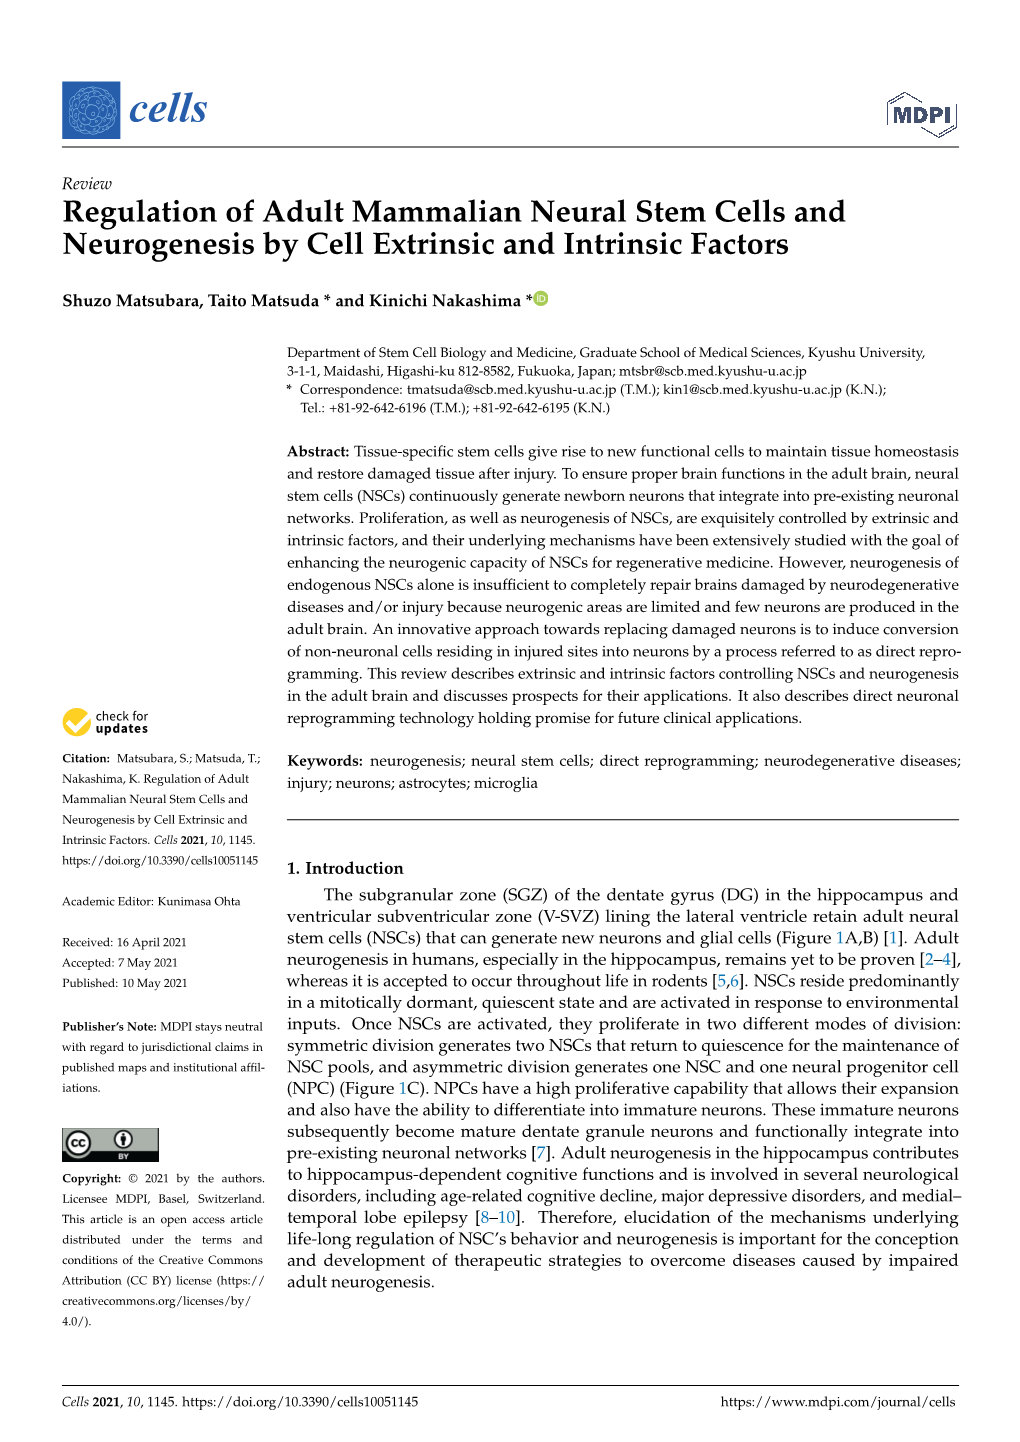 Regulation of Adult Mammalian Neural Stem Cells and Neurogenesis by Cell Extrinsic and Intrinsic Factors